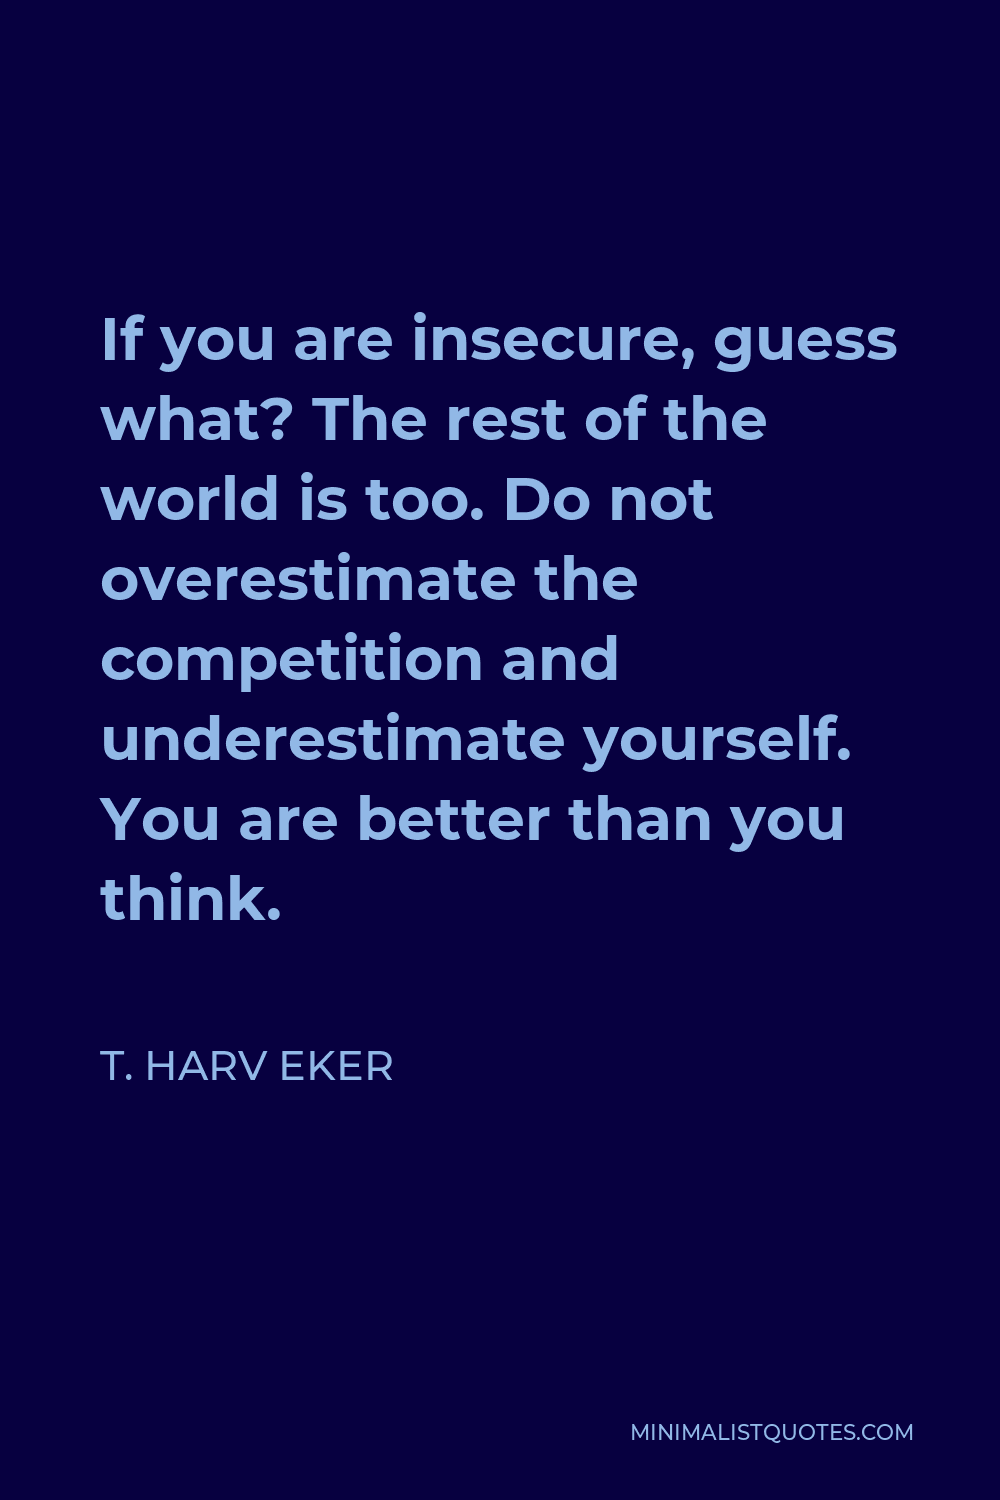 T. Harv Eker Quote - If you are insecure, guess what? The rest of the world is too. Do not overestimate the competition and underestimate yourself. You are better than you think.